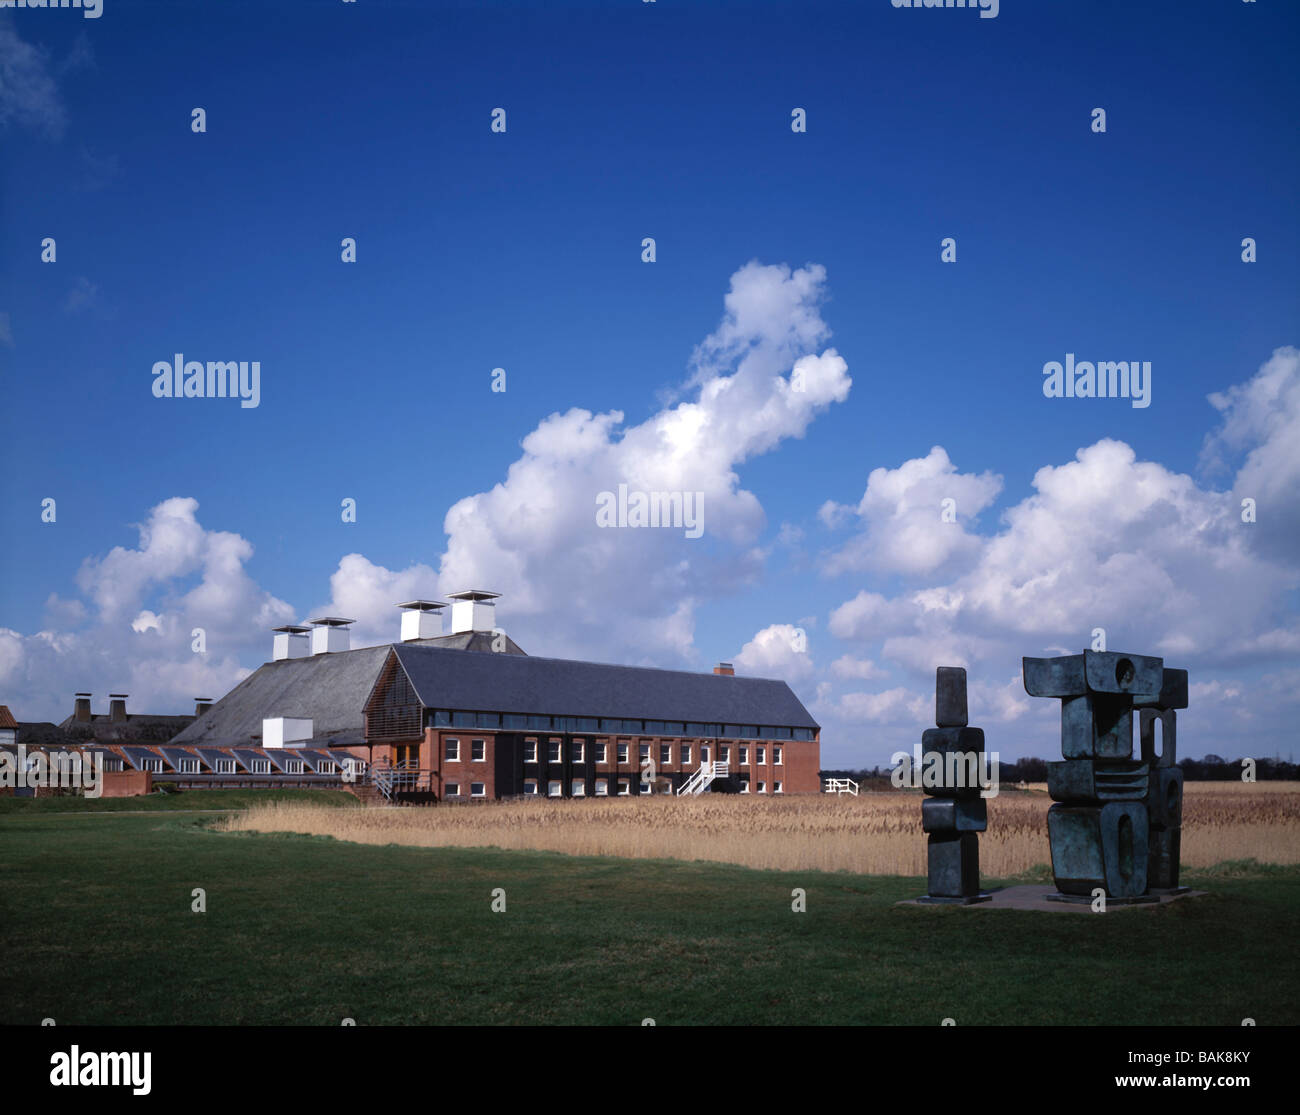 snape maltings concert hall (aldeburgh productions) side view from fields Stock Photo